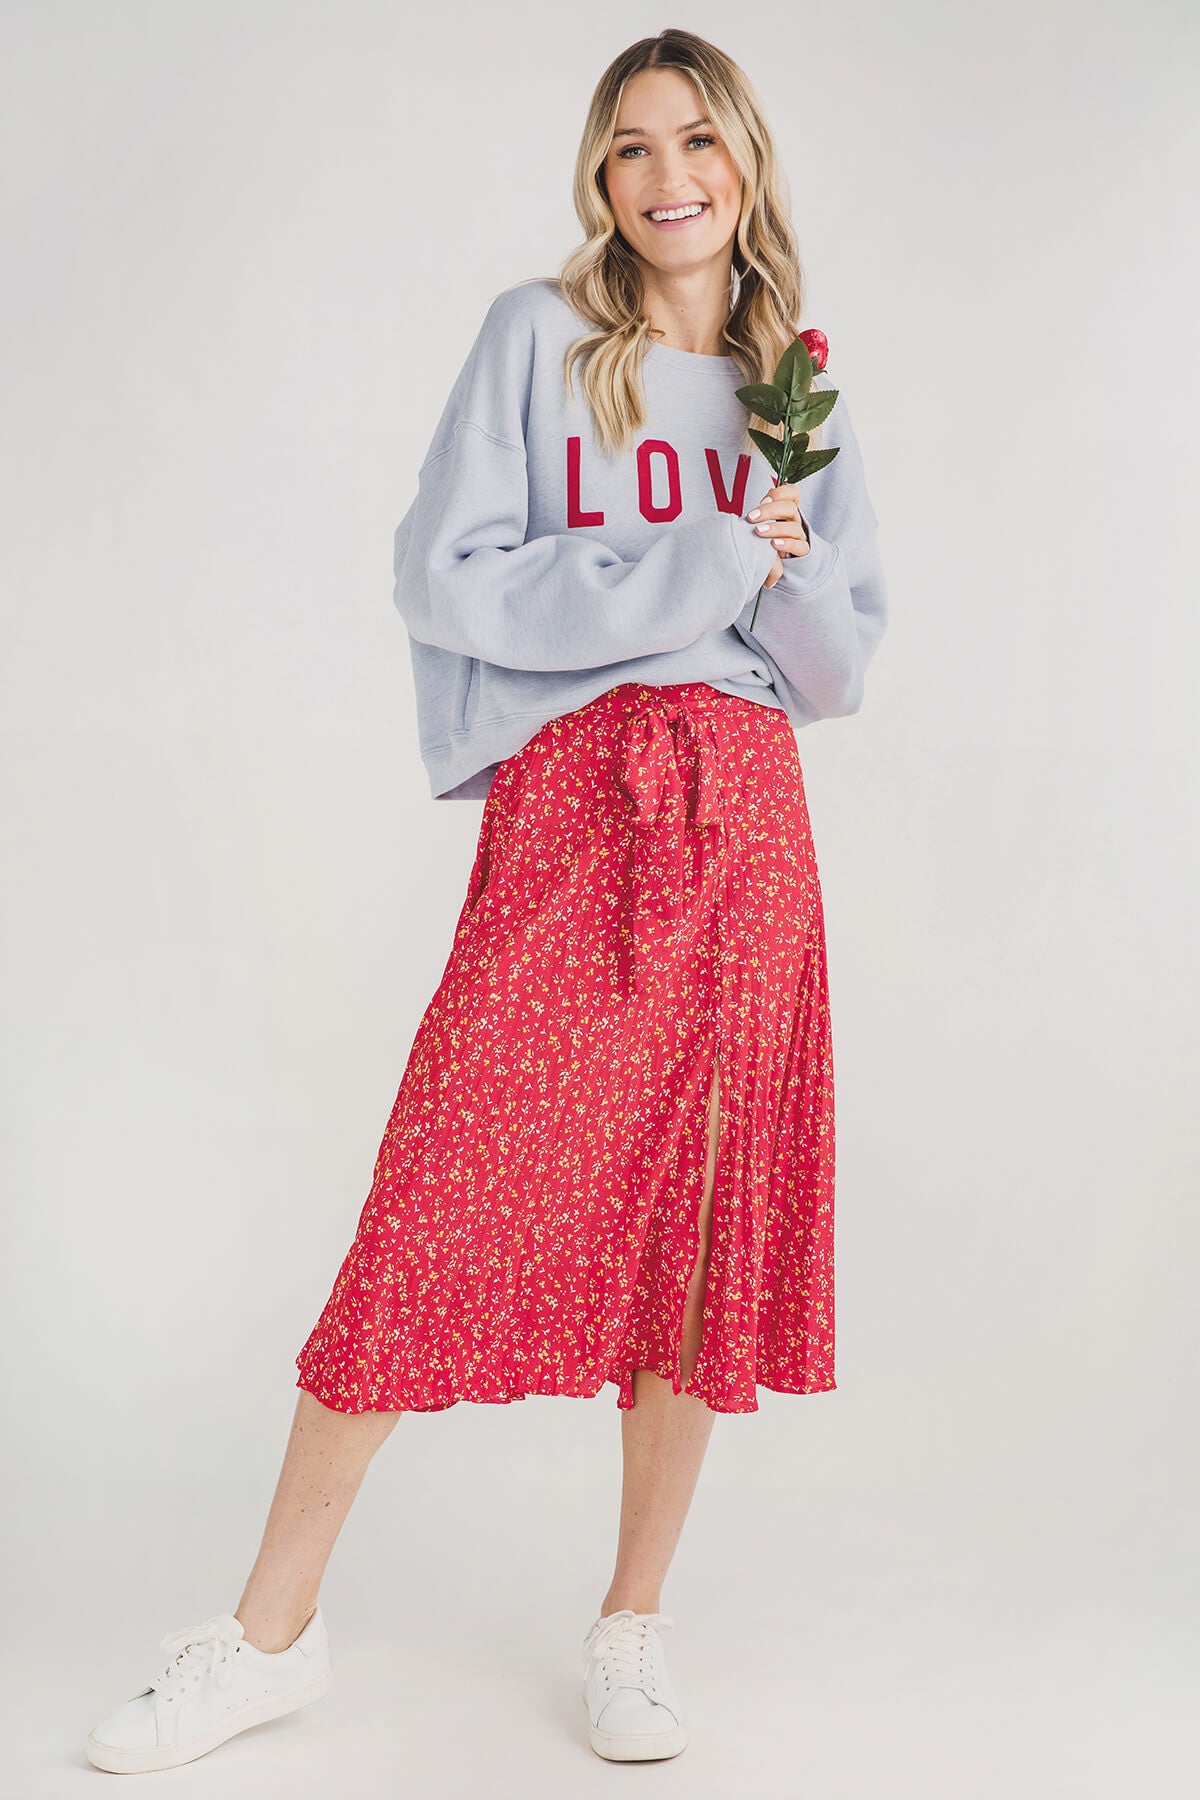 Skies are Blue Ditsy Floral Print Pleated Skirt